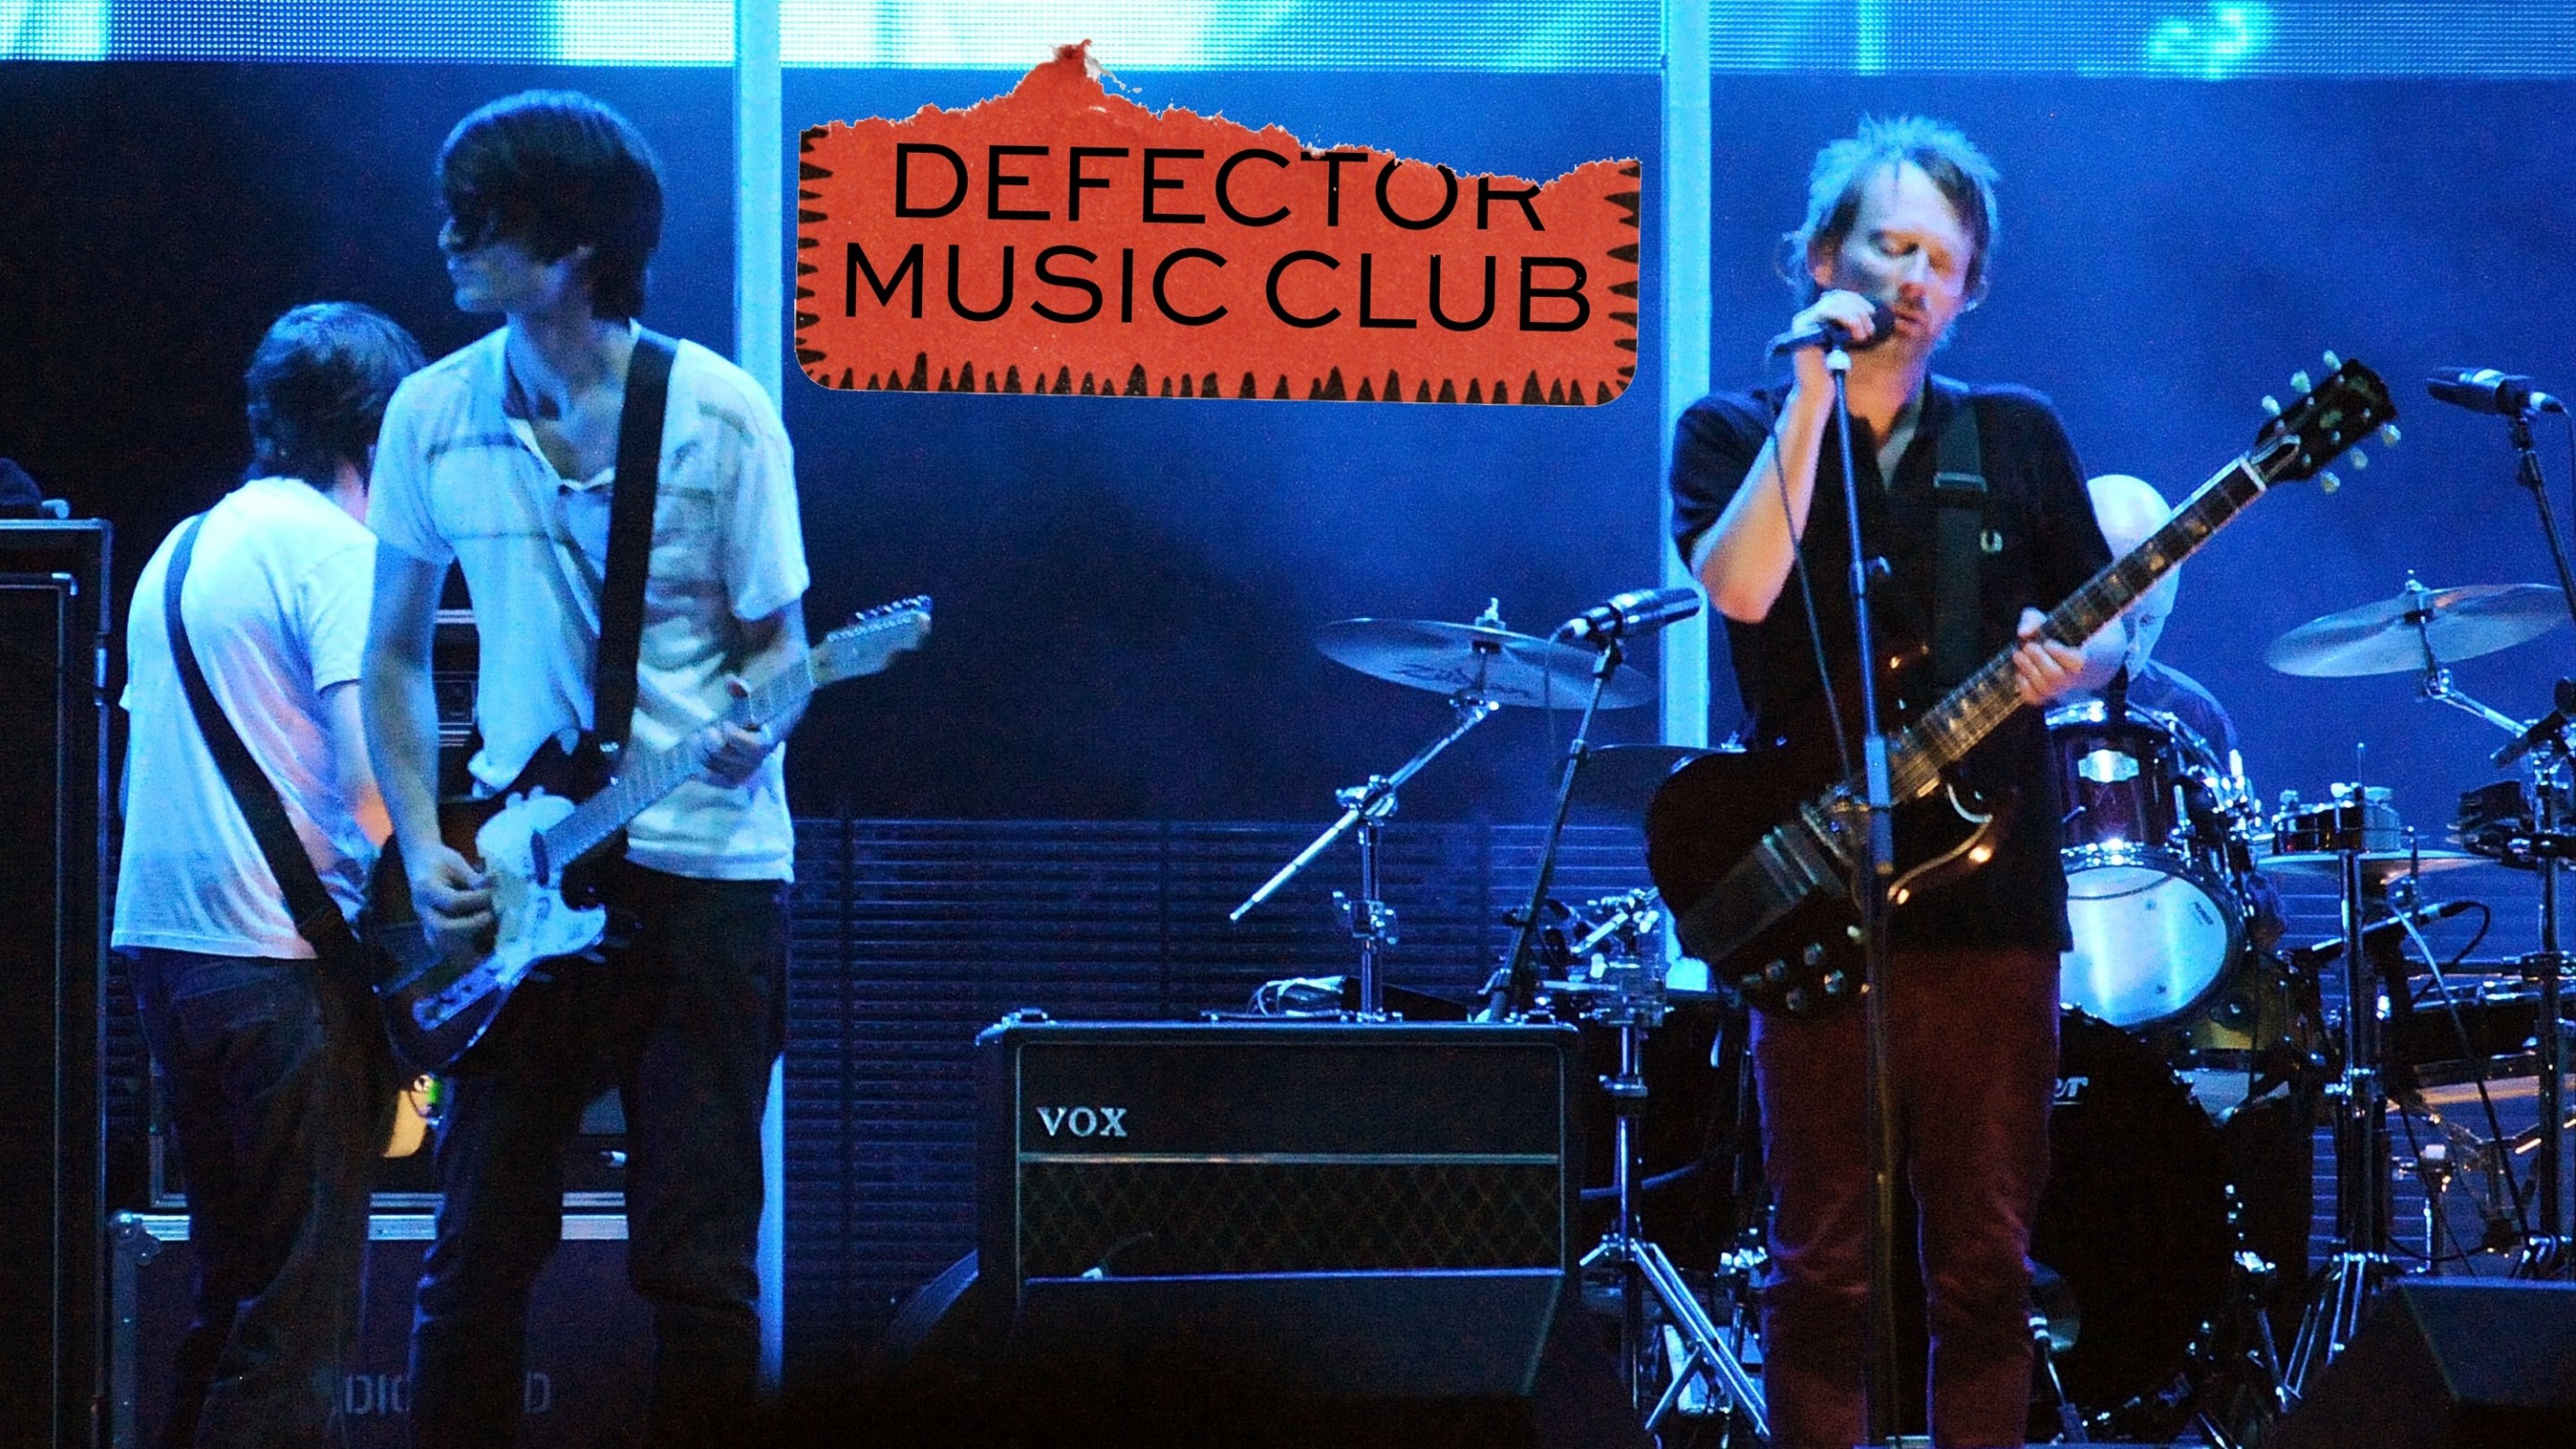 Radiohead performing onstage in support of their 2007 album "In Rainbows," with the Defector Music Club logo right in the middle.